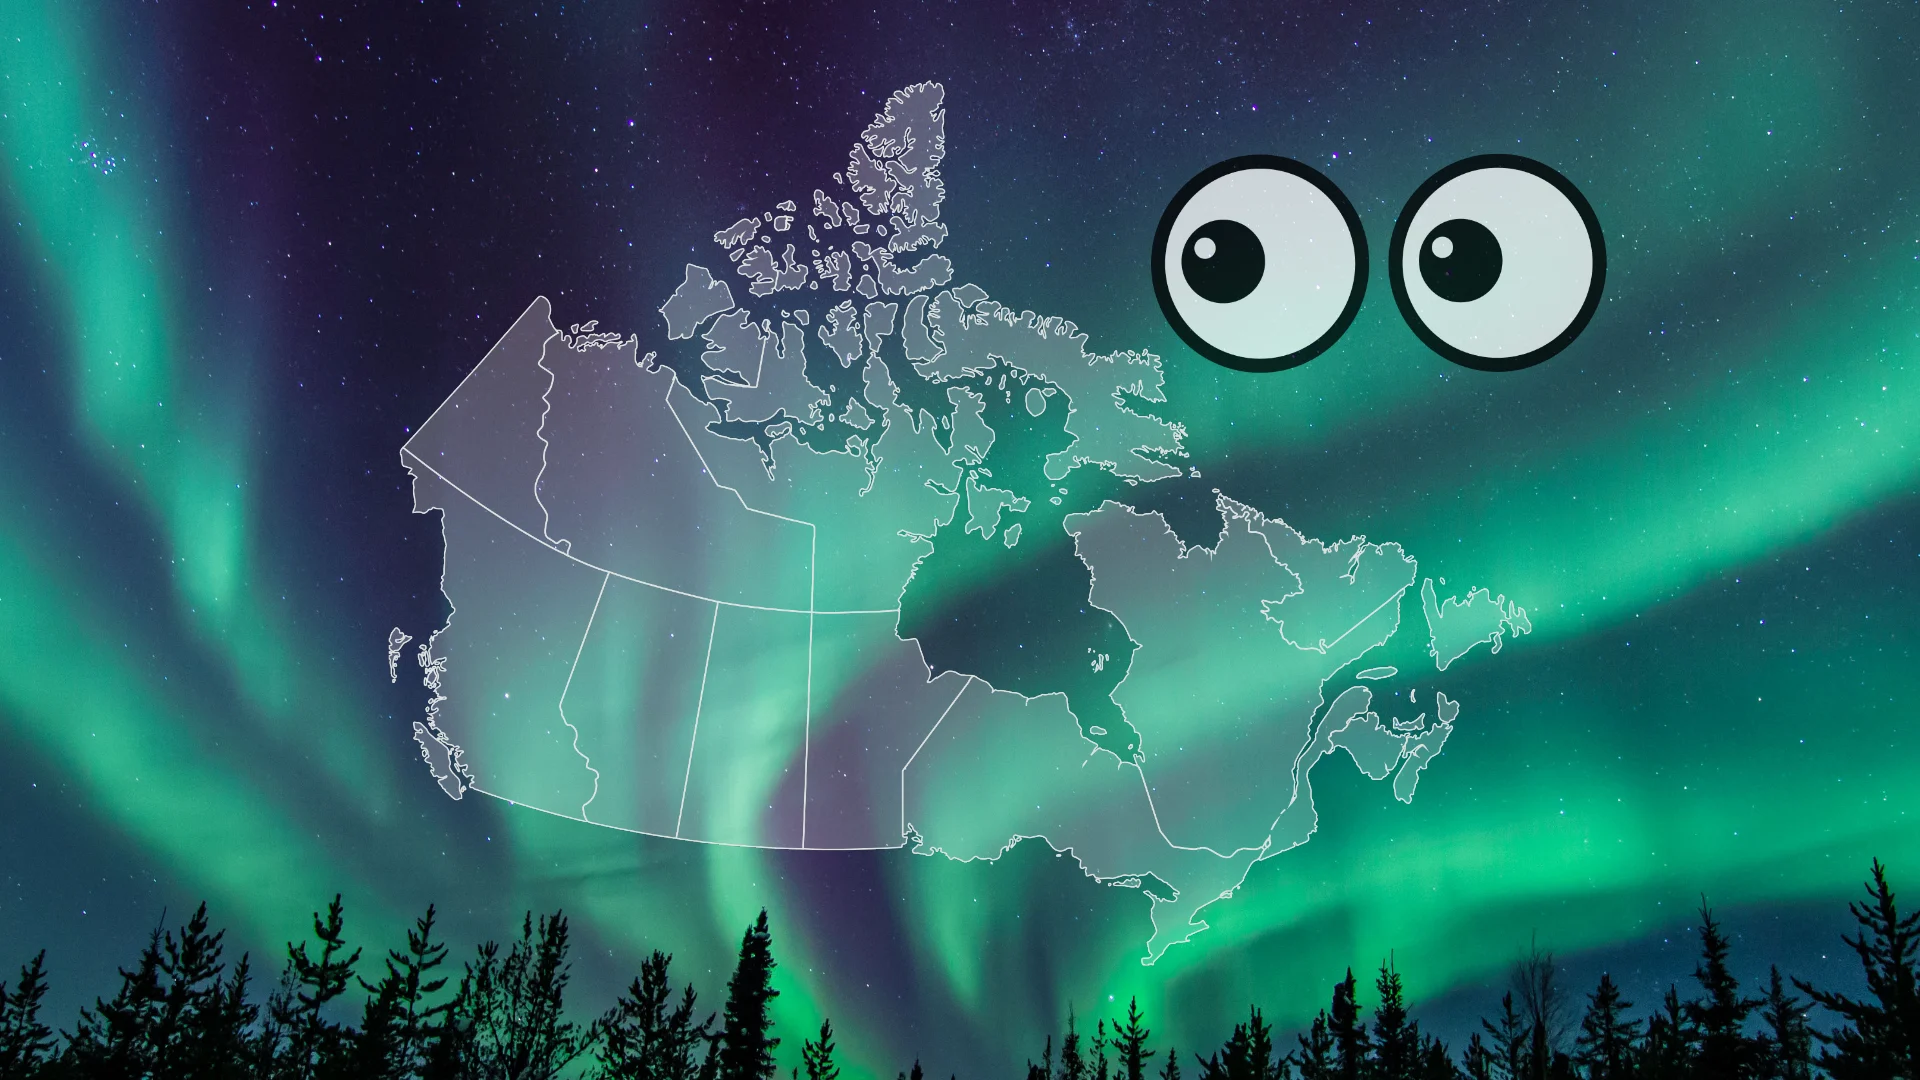 Alberta could have a front-row seat to a dazzling aurora Friday night as a ‘severe’ geomagnetic storm reaches Earth. Timing, details here